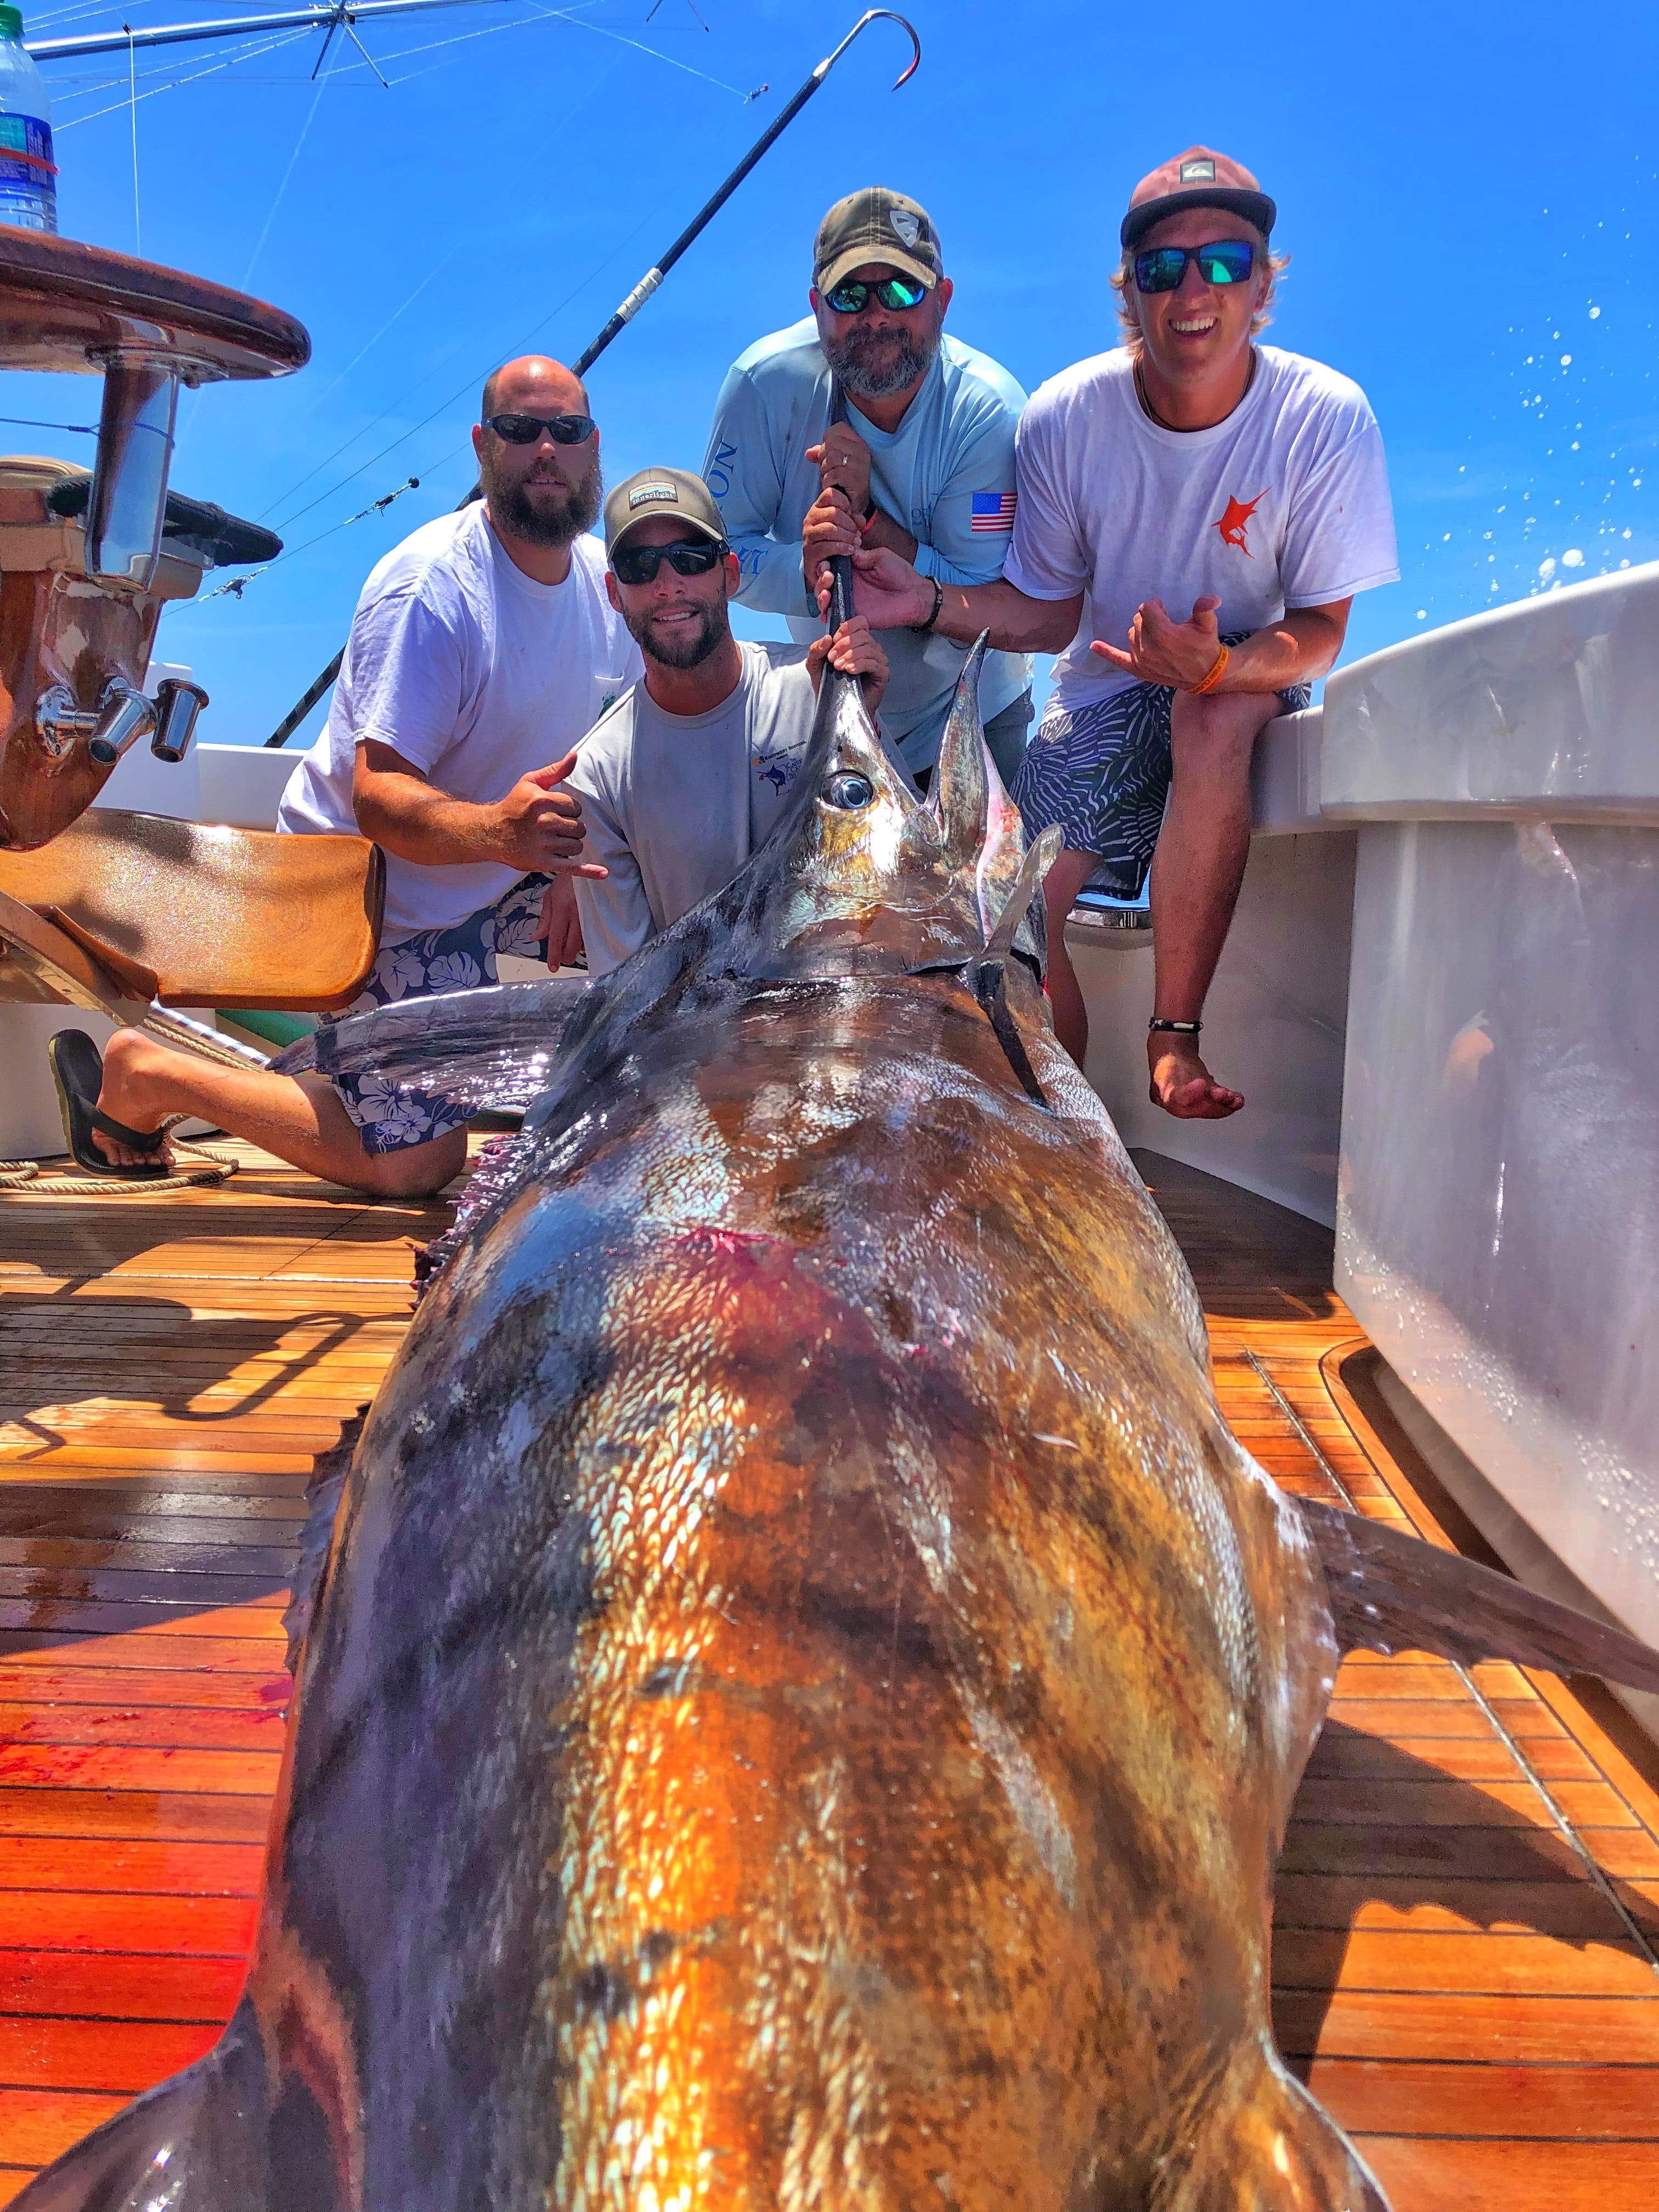 The crew aboard the Wynsong hauled in this 699.3-pound blue marlin during the Cajun Canyons Billfish Classic last weekend in Louisiana. The marlin, caught by Zach Tokheim, measured 119 inches and took four-hours to haul in. Pictured from left are Capt. Allen Staples, Capt. Caleb Brown, Chris Sheppard and Zach Tokheim. [CONTRIBUTED PHOTO]